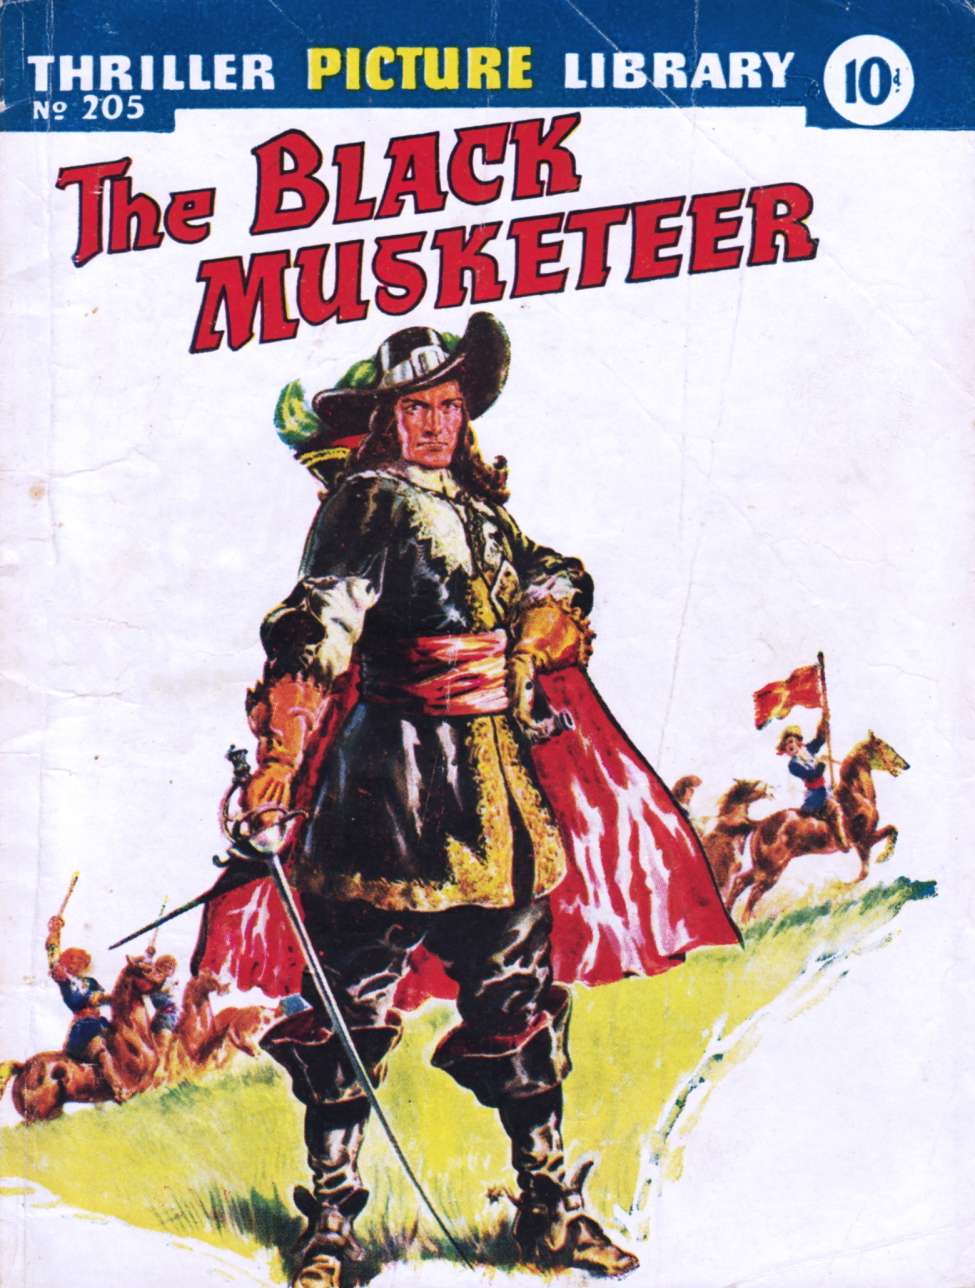 Book Cover For Thriller Picture Library 205 - The Black Musketeer